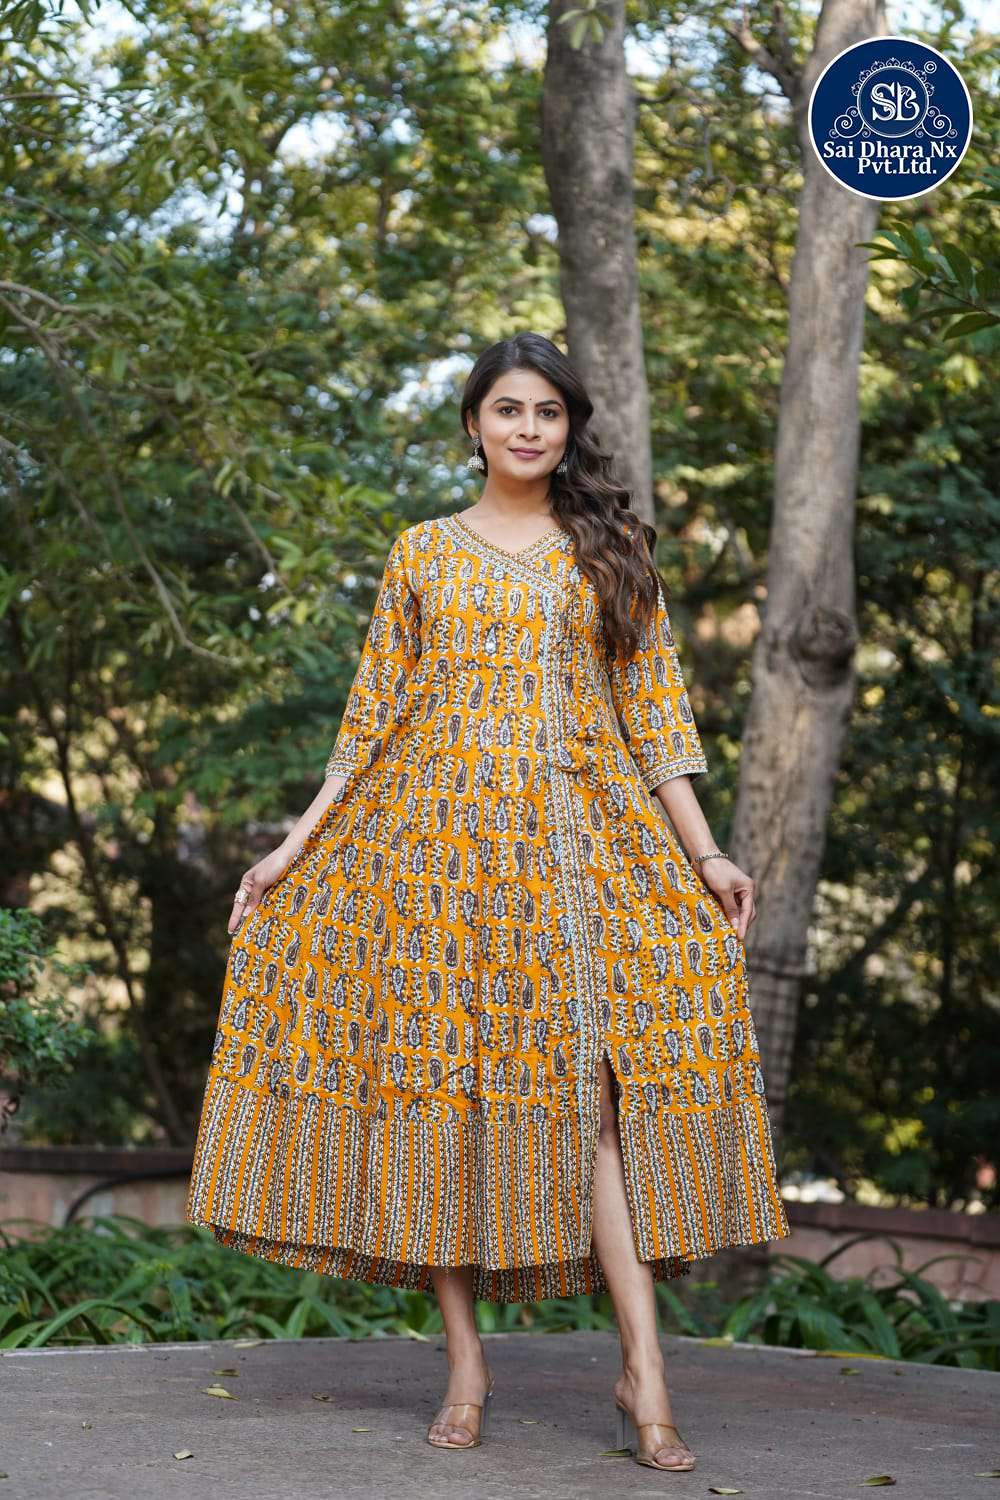 SAIDHARANX PRESENTS LATEST ARRIVED REYON FABRIC BASED ANARKALI GOWN COLLECTION WHOLESALE SHOP IN SURAT - SaiDharaNx